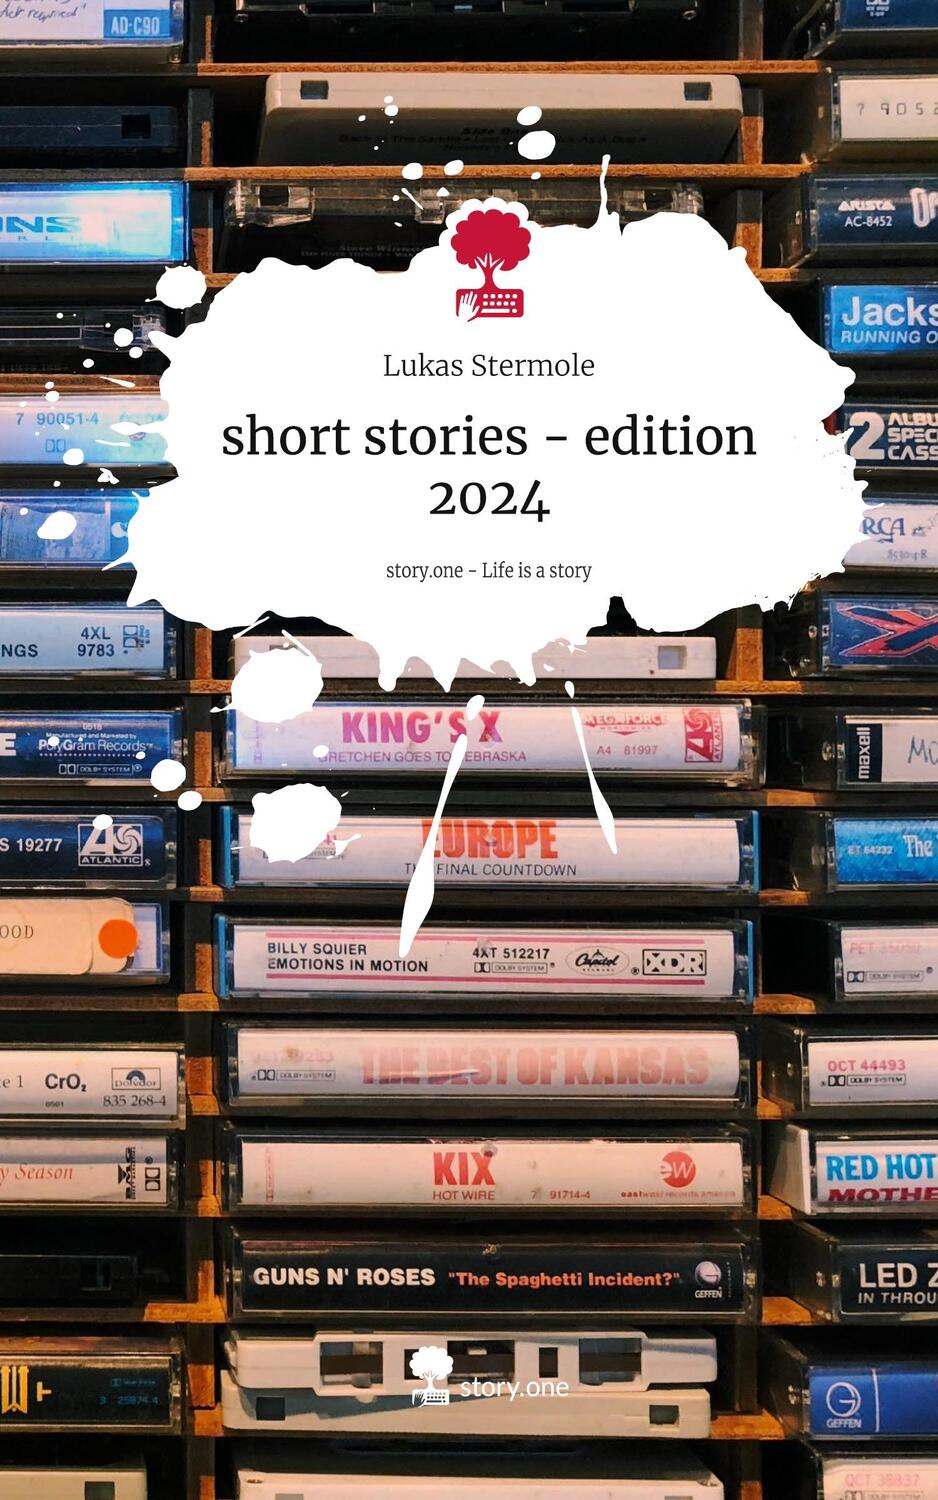 Cover: 9783711529237 | short stories - edition 2024. Life is a Story - story.one | Stermole